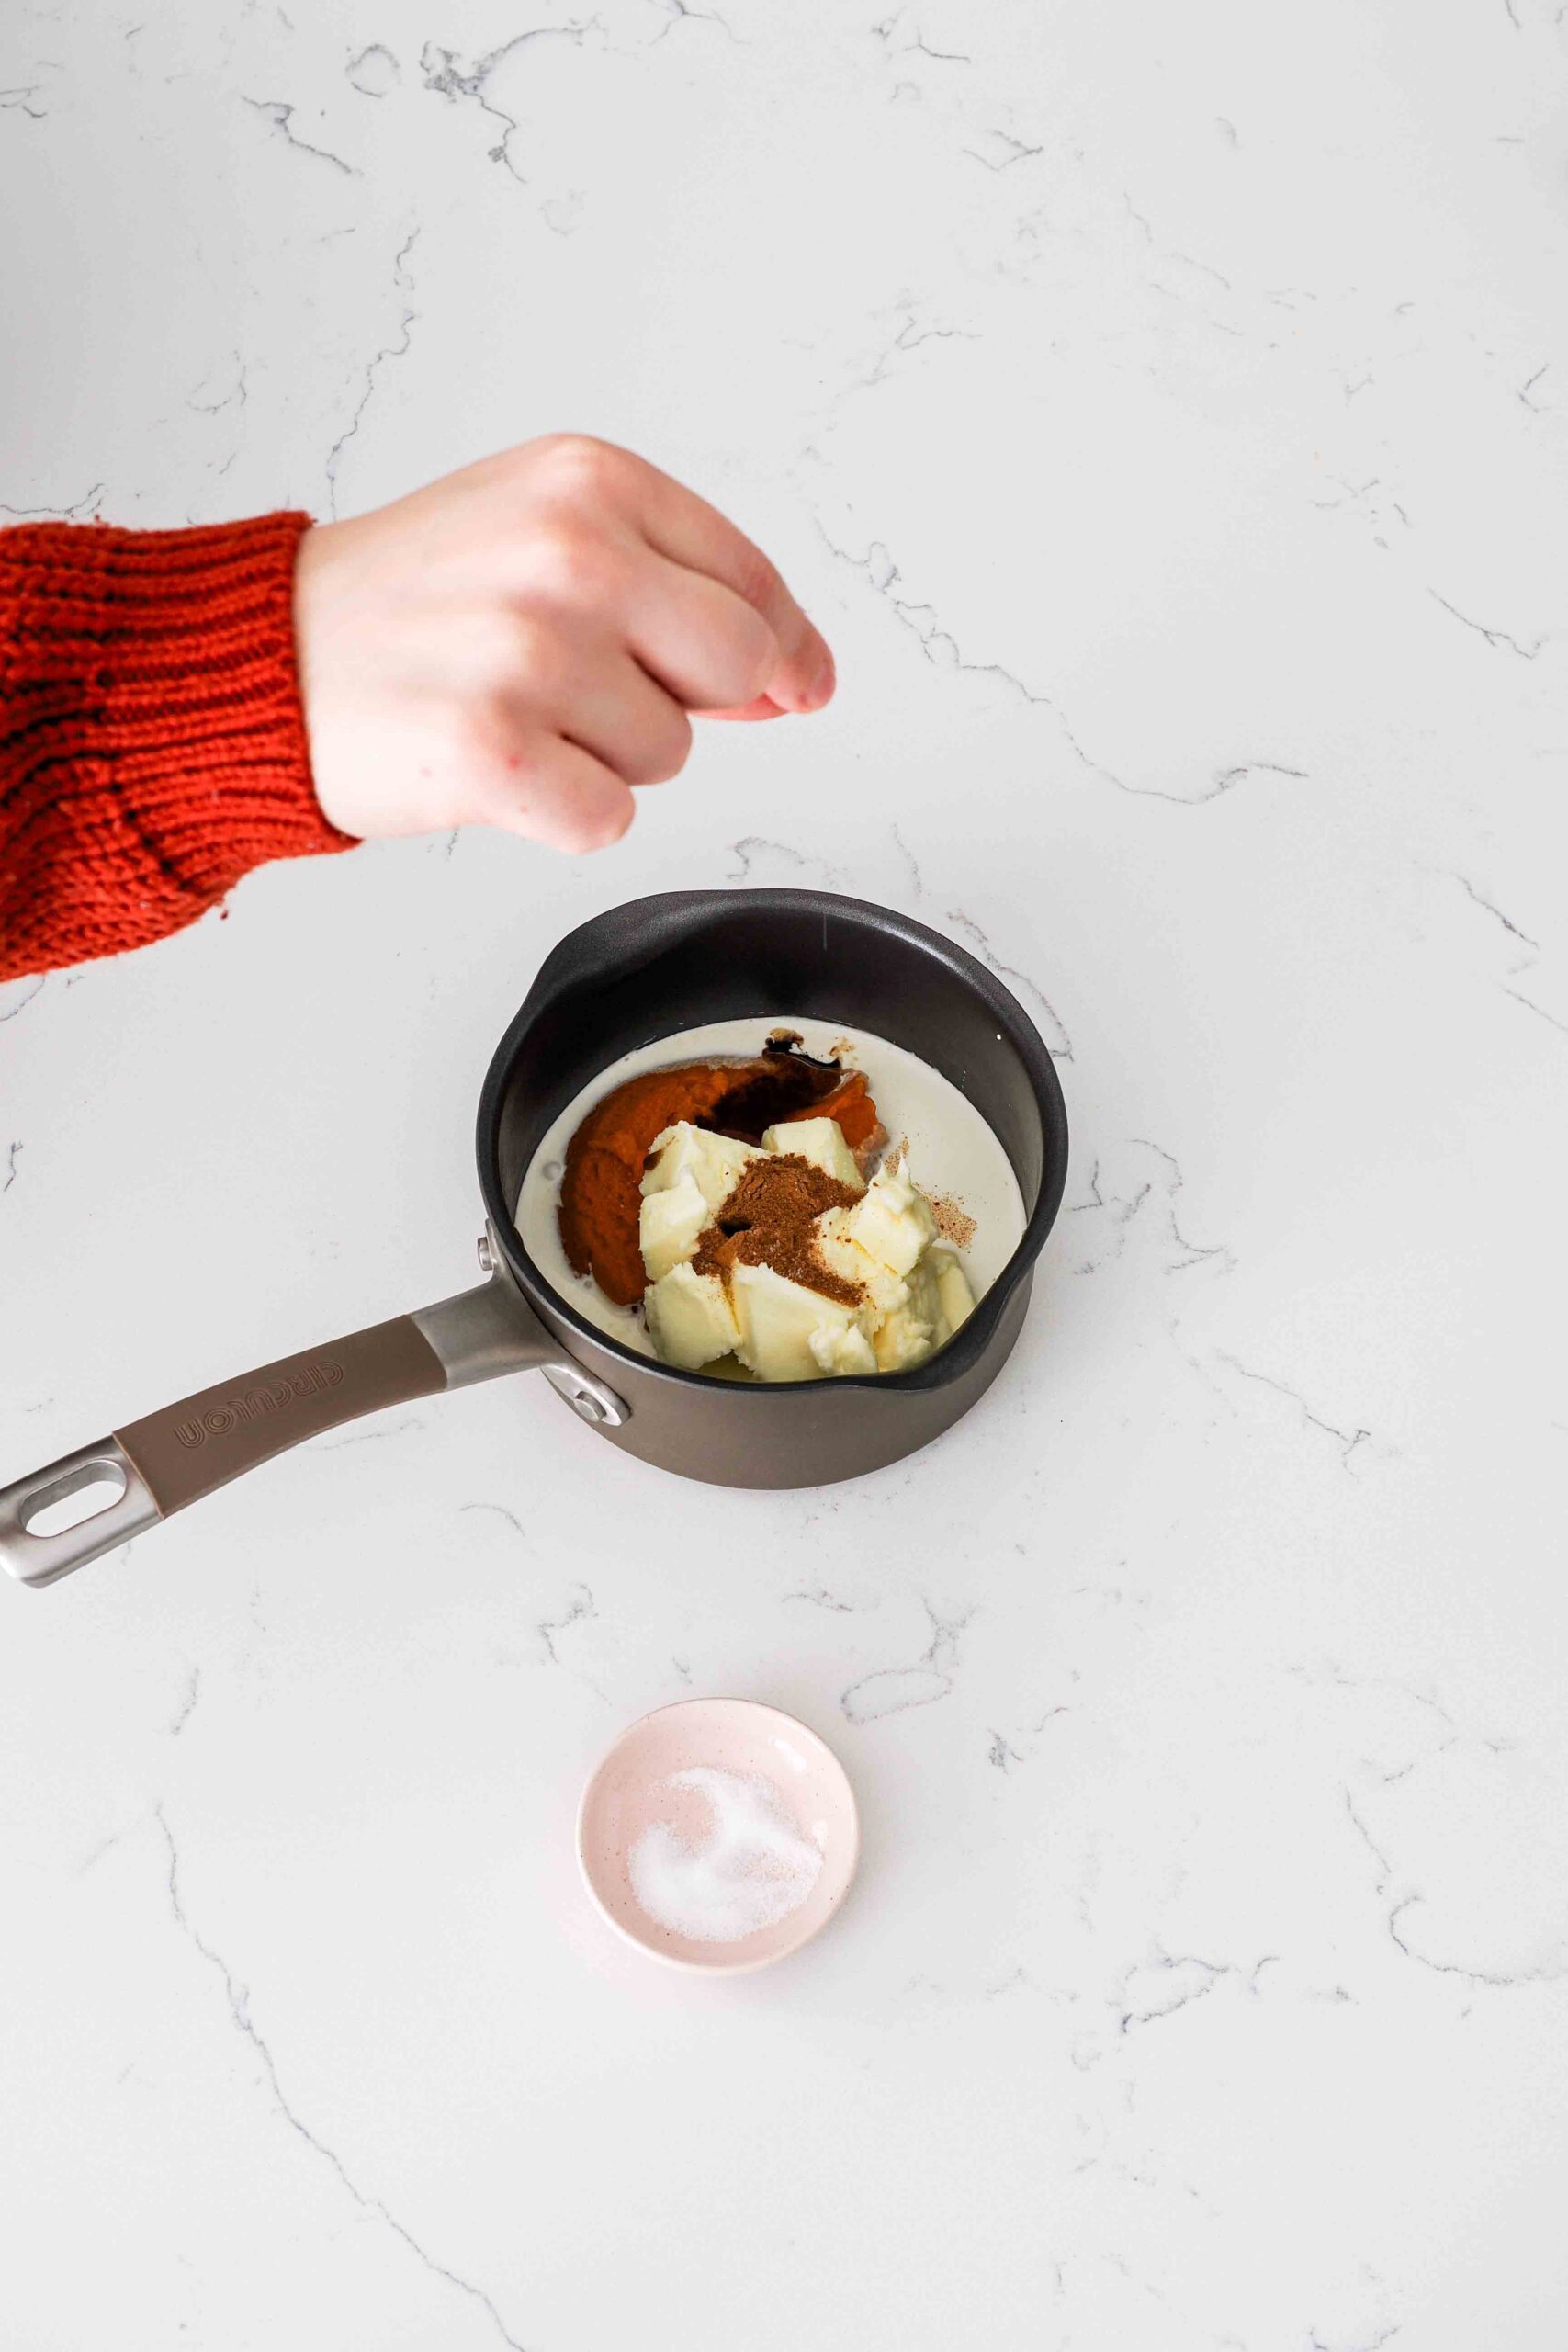 A hand adds a pinch of salt to a small saucepan with pumpkin, butter, and other ingredients.